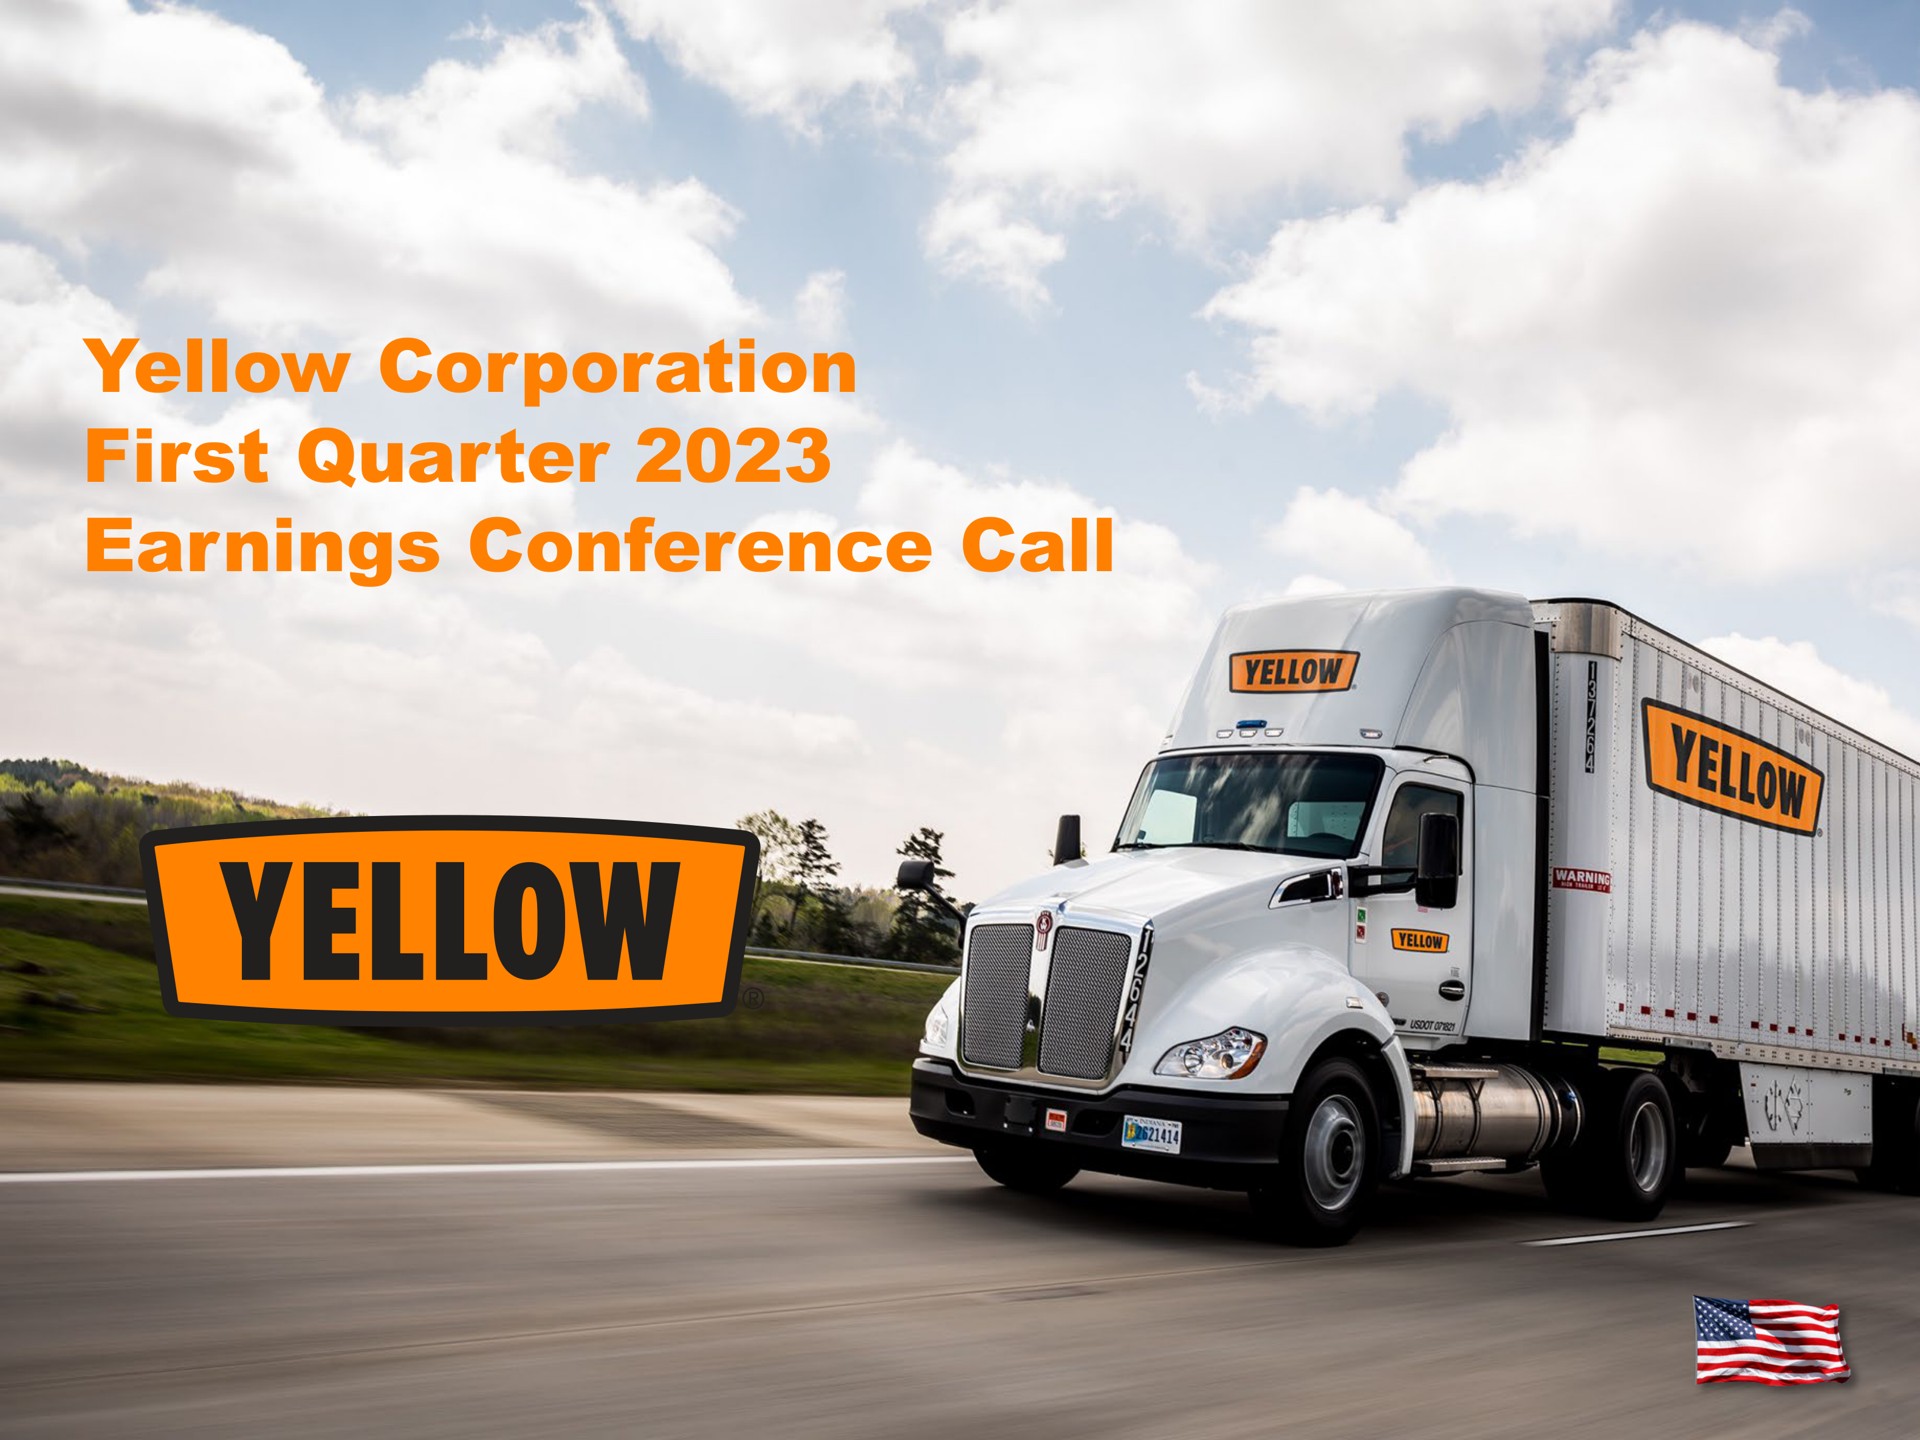 yellow corporation first quarter earnings conference call | Yellow Corporation